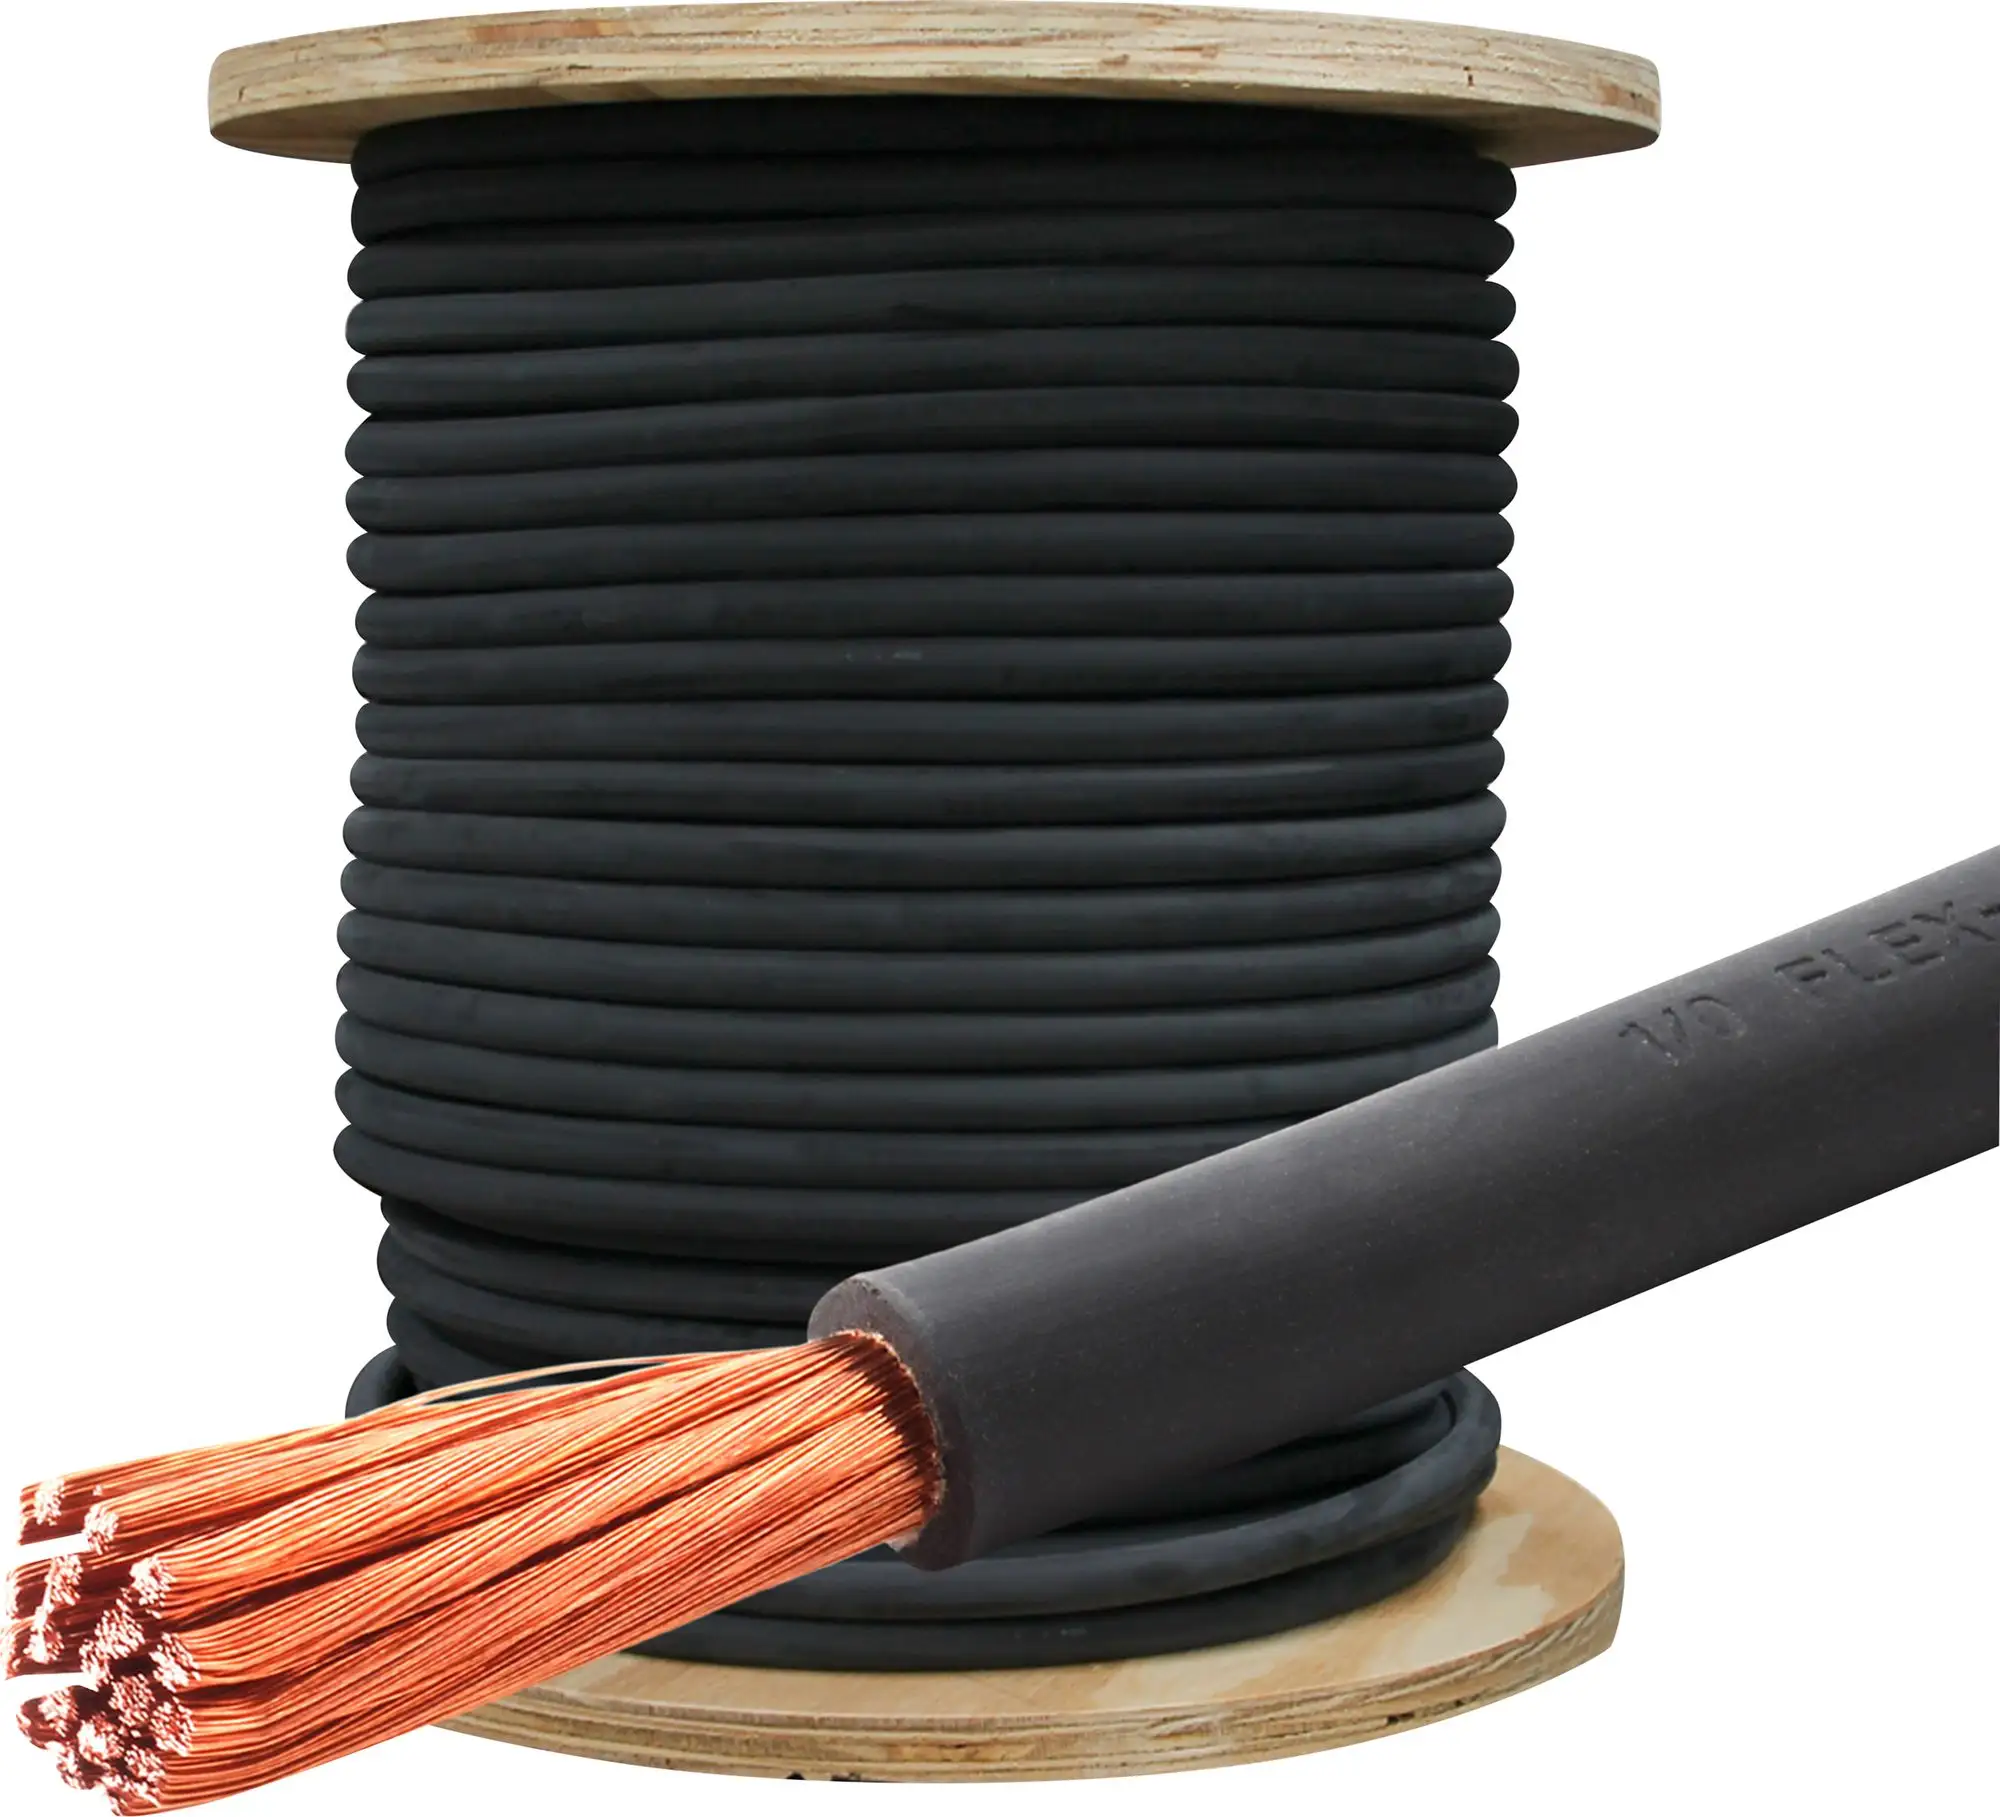 16mm2,25mm2,35mm2,50mm2,70mm2,95mm2 Rubber/EPR/CPE double jacket Welding Cable